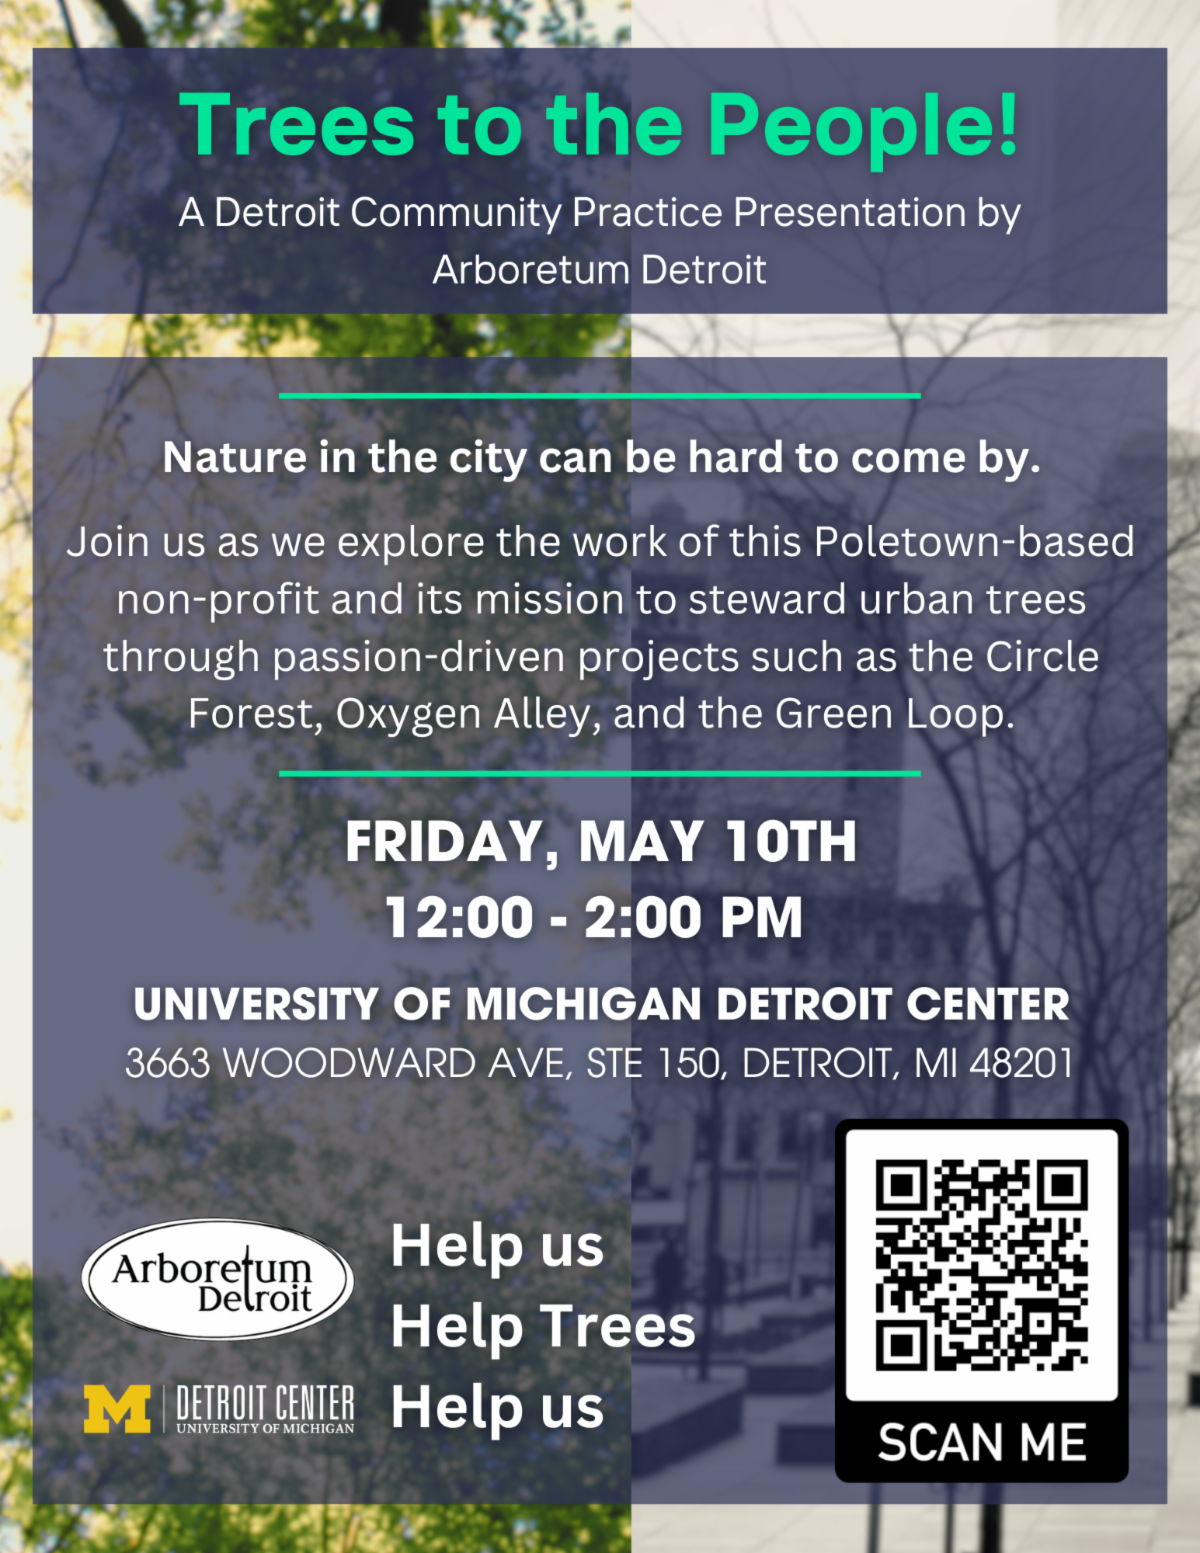 community of practice event flyer "Trees to the People! A Detroit Community Practice Presentation by Arboretum Detroit" "Nature in the city can be hard to come by. Join us as we explore the work of this Poletown-based non-profit and its mission to steward urban trees through passion-driven projects such as the Circle Forest, Oxygen Alley, and the Green Loop"